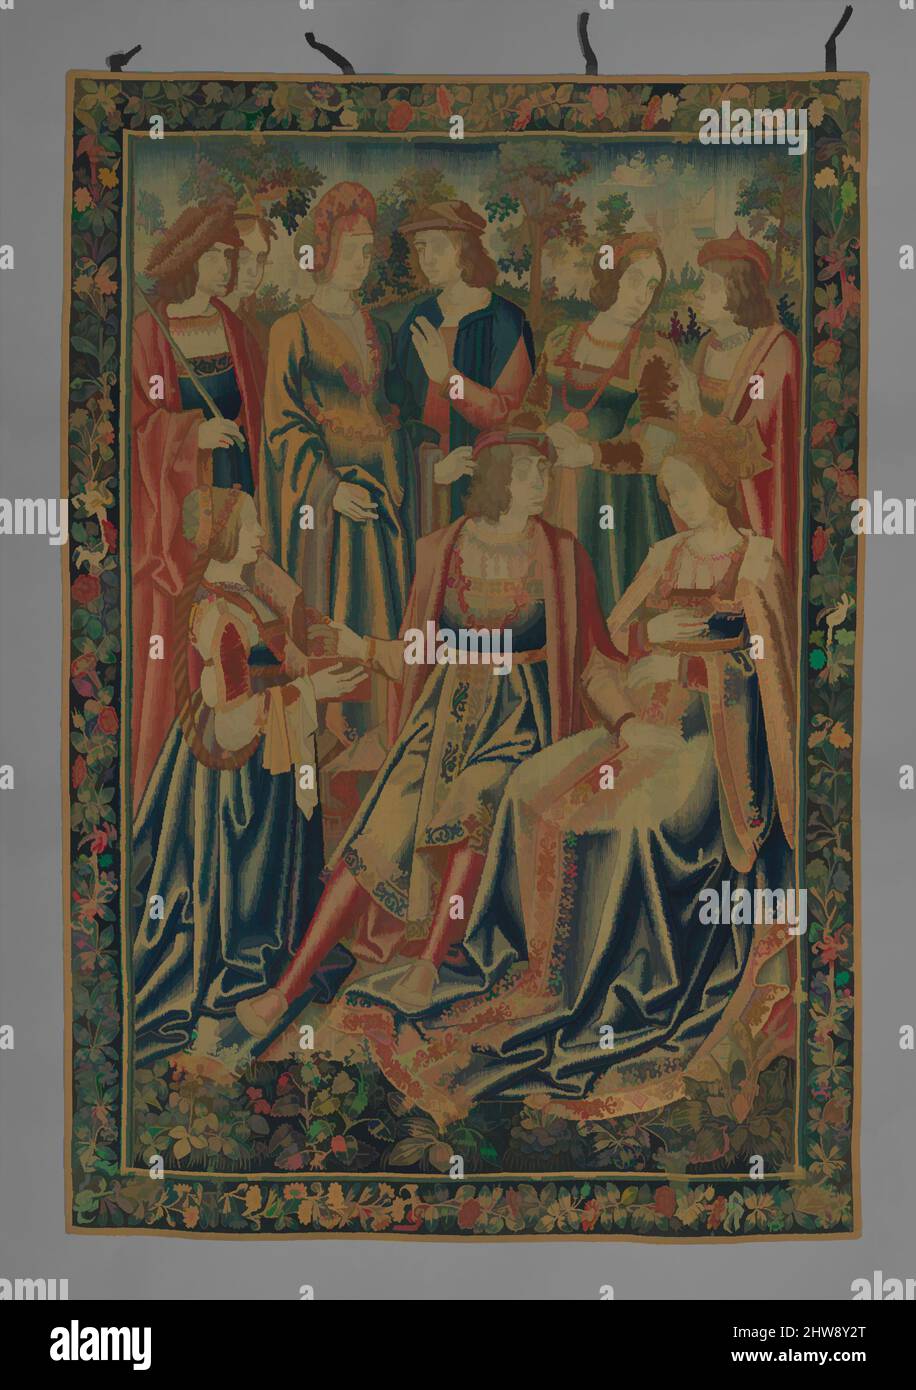 Art inspired by Two Episodes from the Parable of the Prodigal Son, ca. 1510–25, South Netherlandish, Wool warp; wool and silk wefts, Overall: 93 x 64 1/4in. (236.2 x 163.2cm), Textiles-Tapestries, Classic works modernized by Artotop with a splash of modernity. Shapes, color and value, eye-catching visual impact on art. Emotions through freedom of artworks in a contemporary way. A timeless message pursuing a wildly creative new direction. Artists turning to the digital medium and creating the Artotop NFT Stock Photo